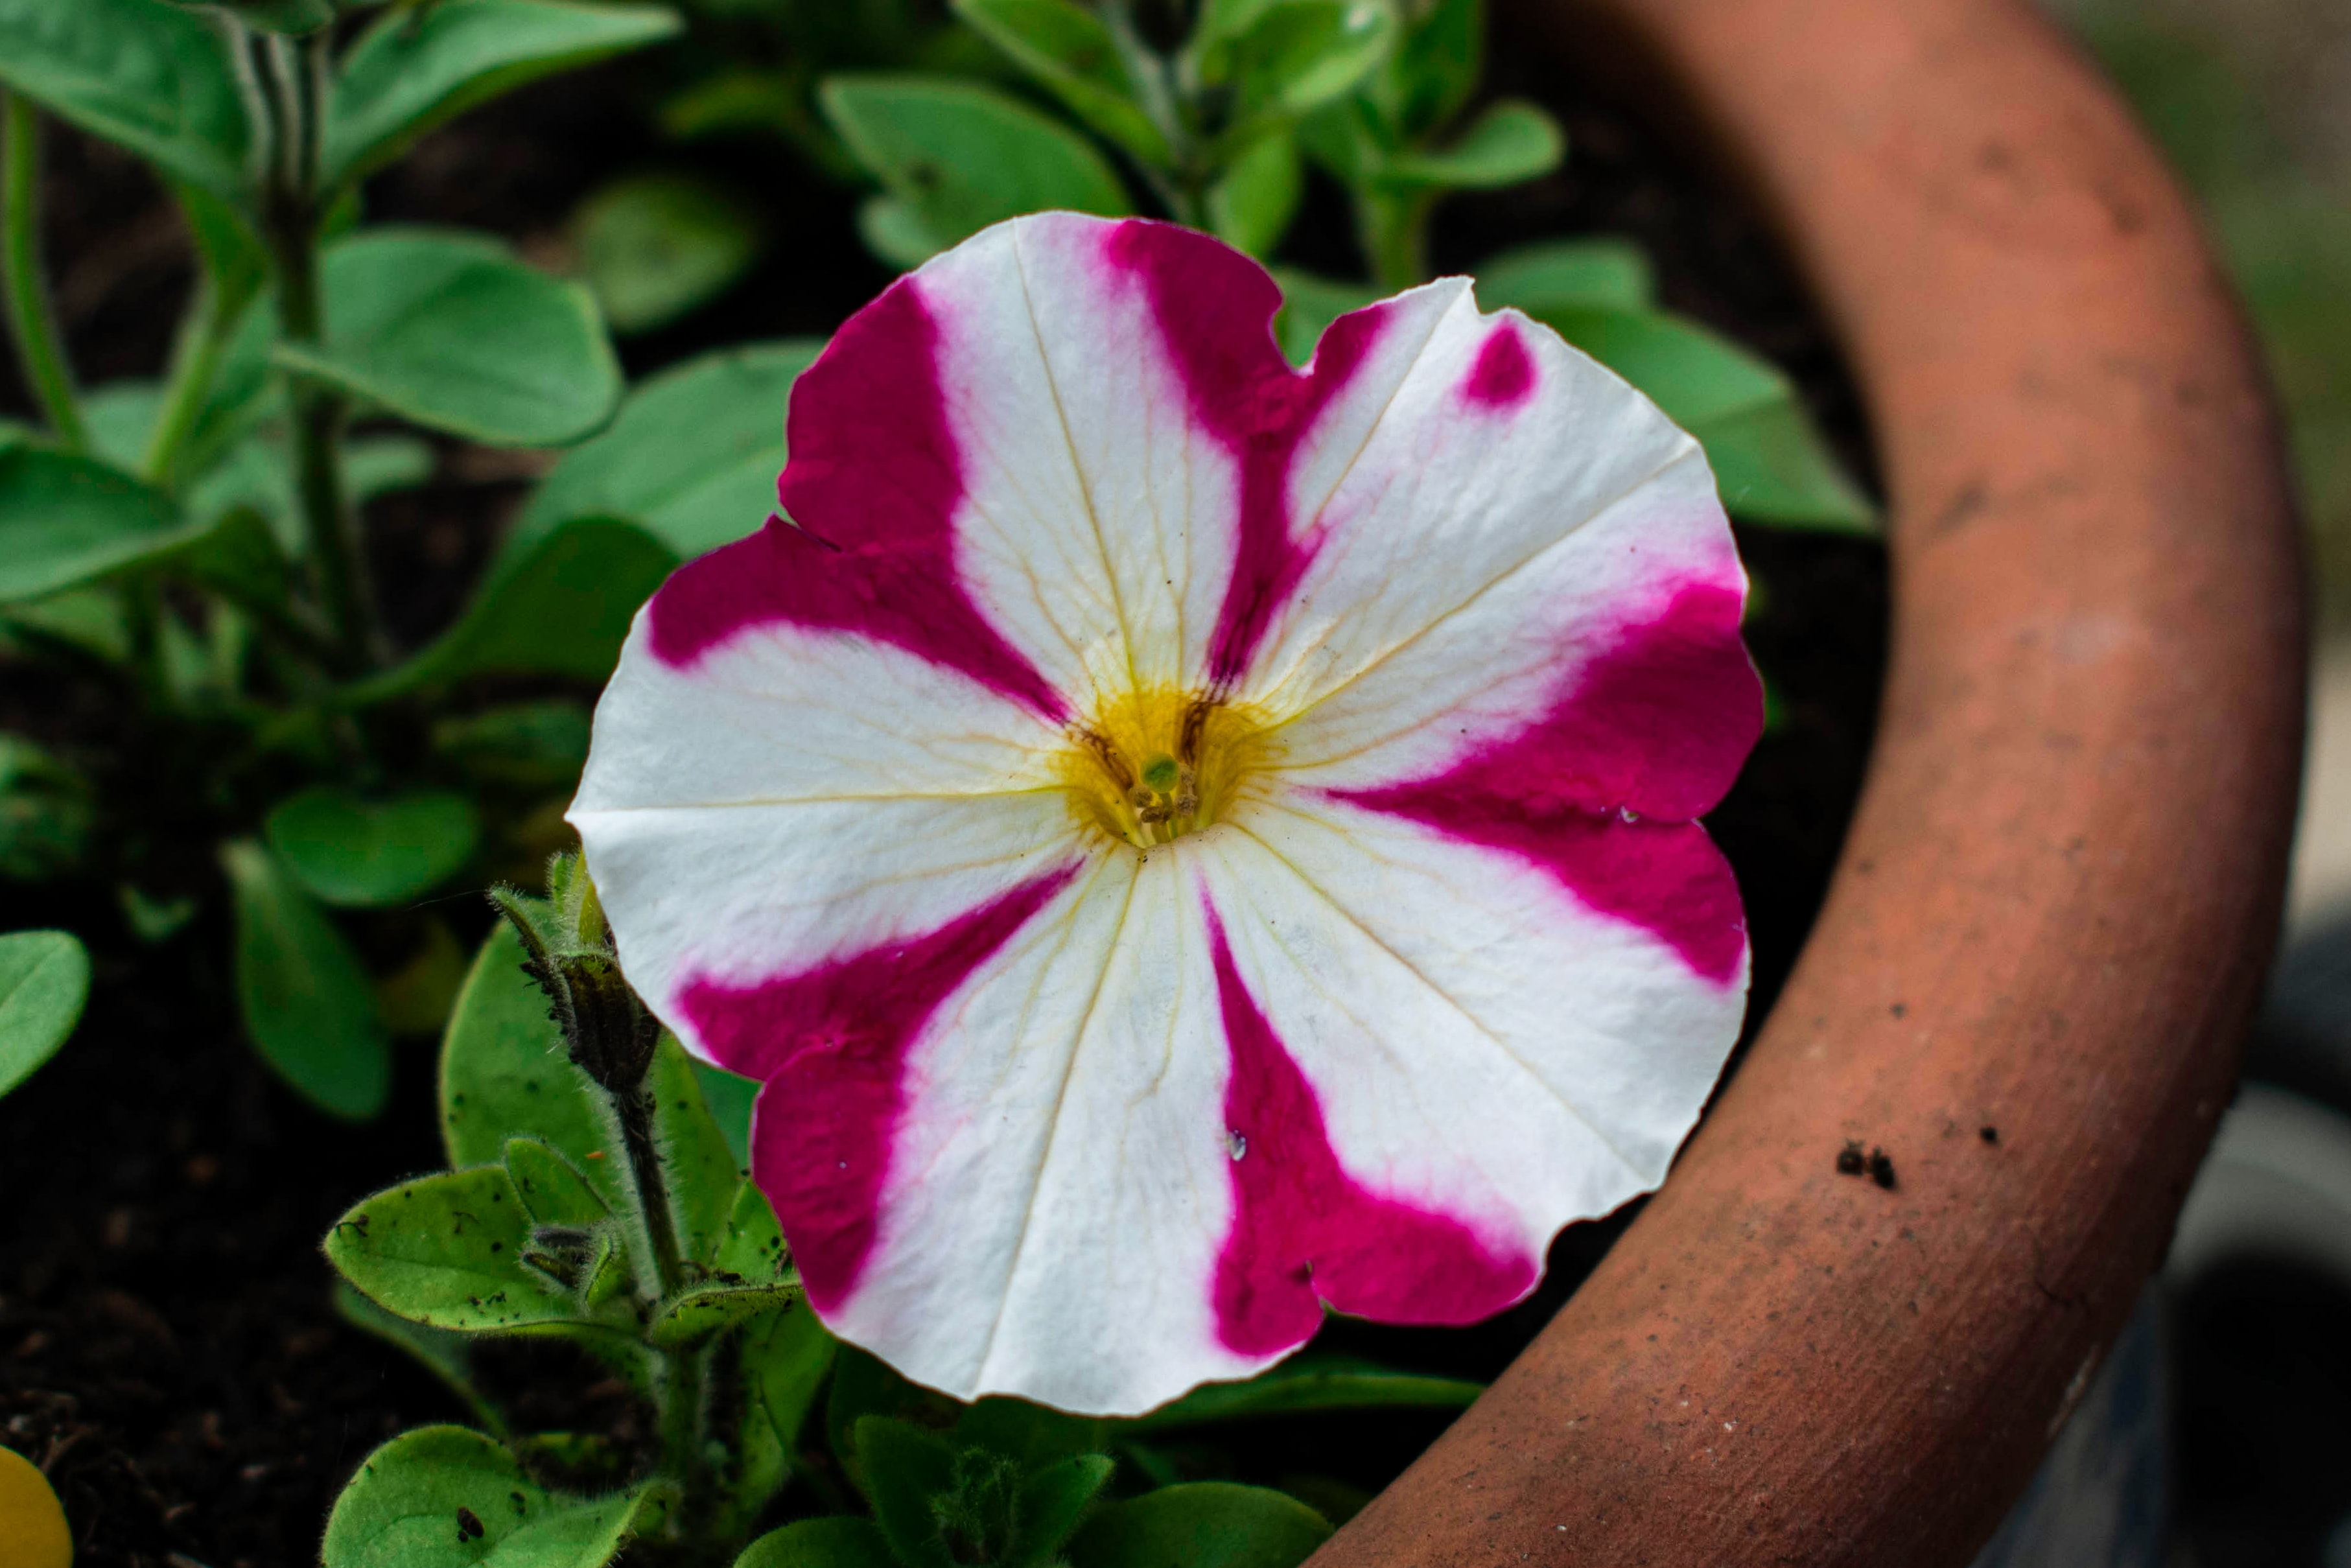 The best way to repot your Petunia